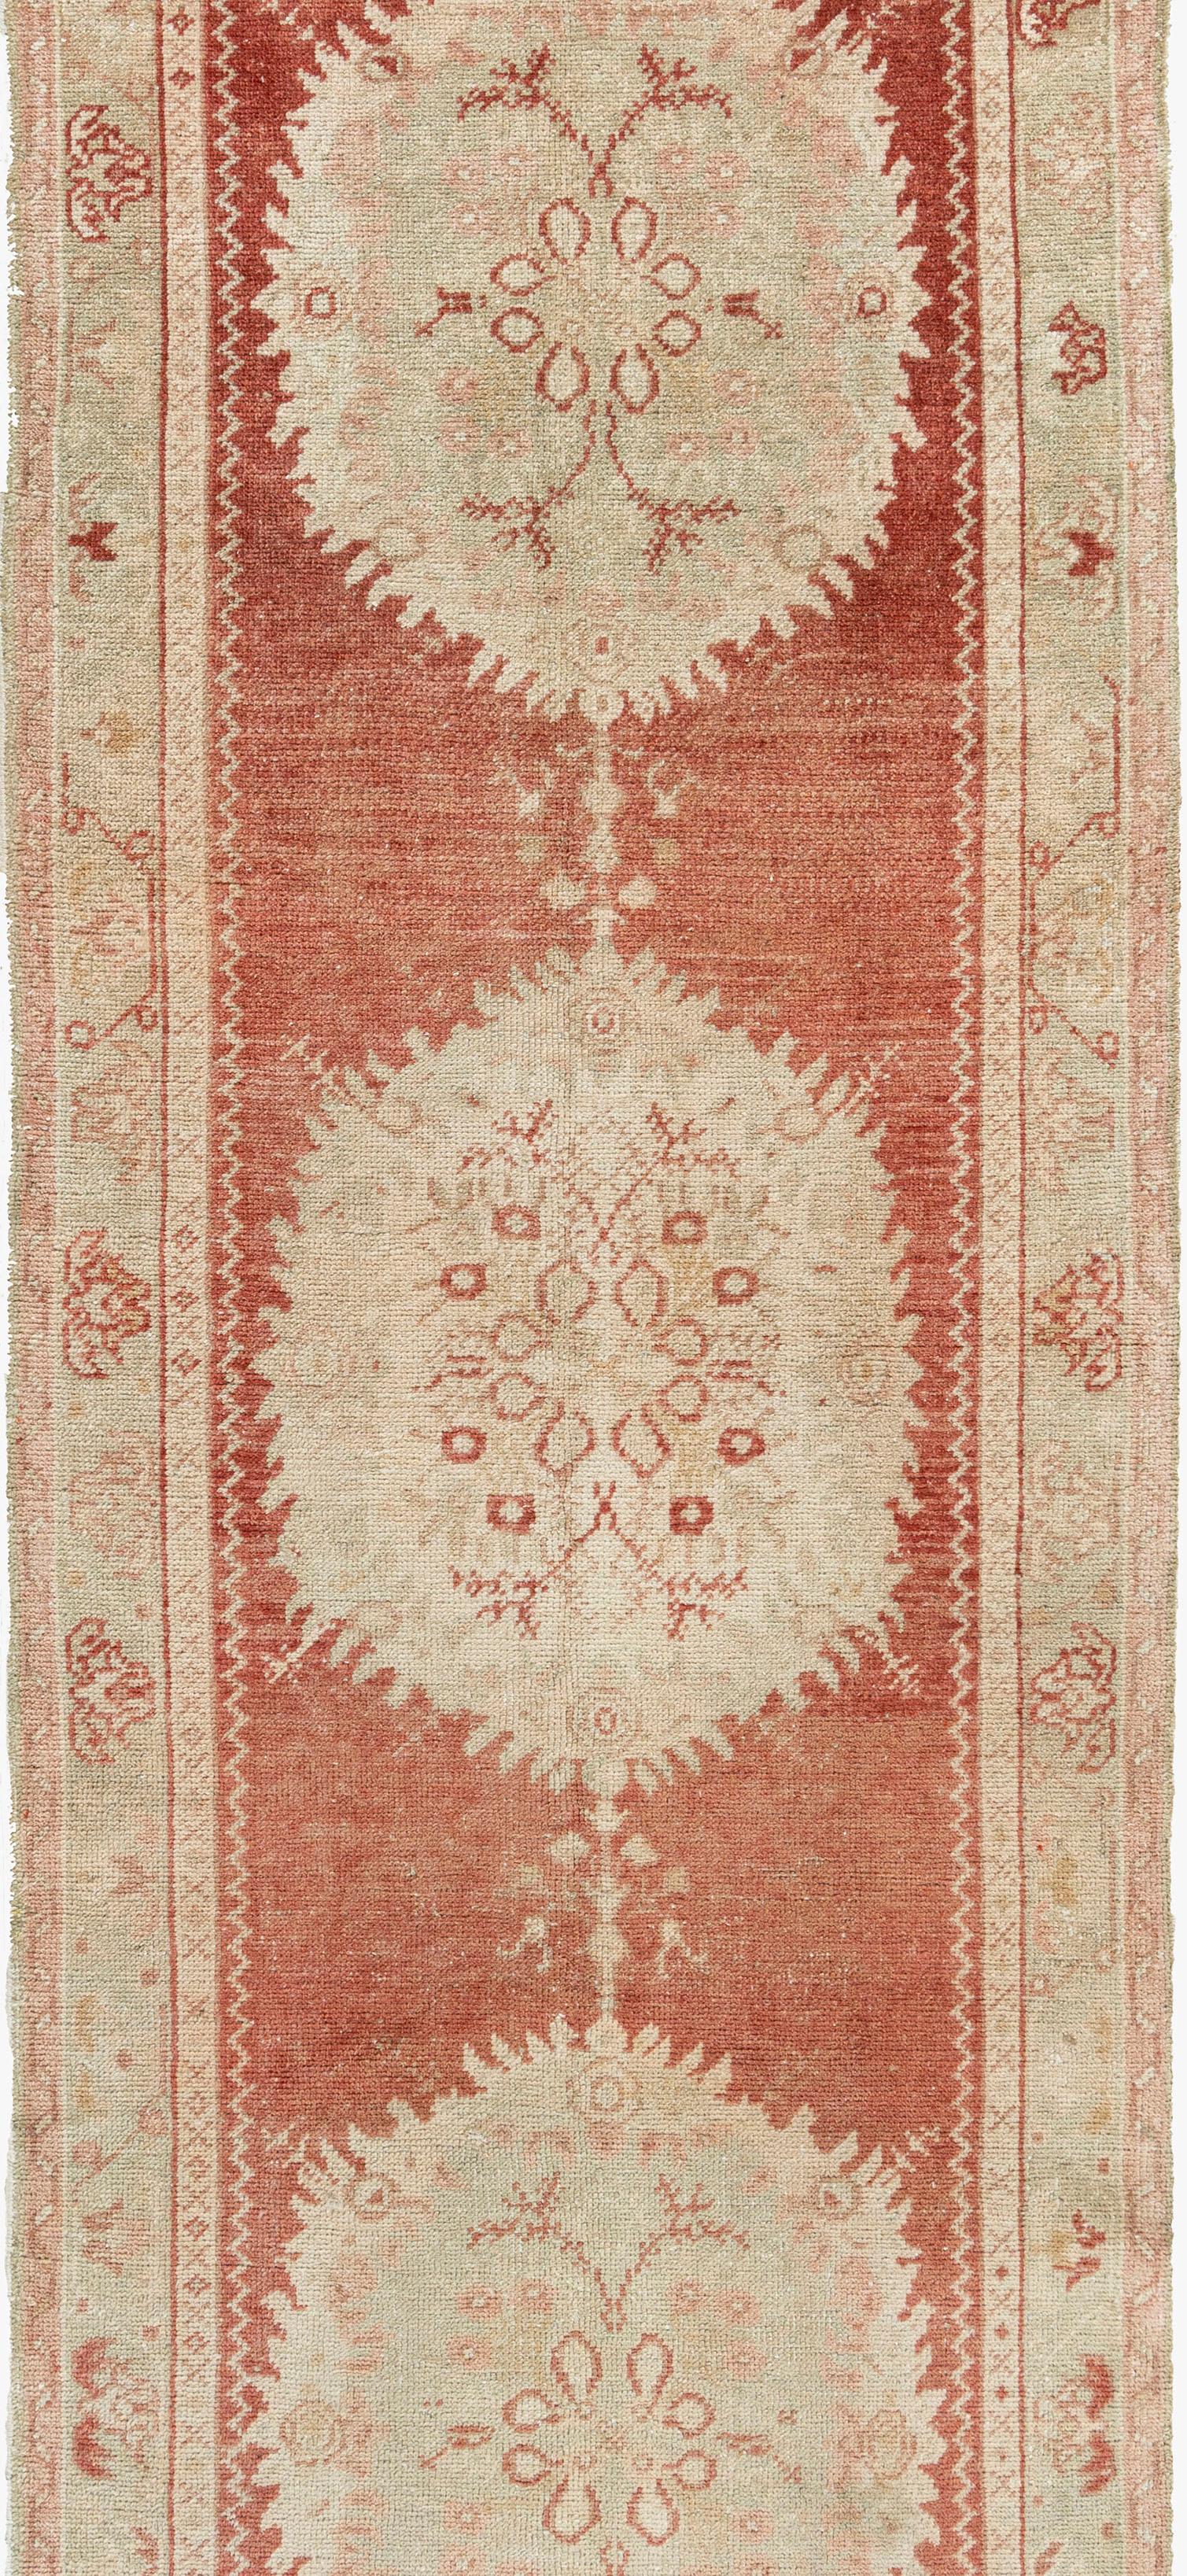 Vintage Turkish Oushak Runner 2'11x11'7 In Good Condition For Sale In New York, NY